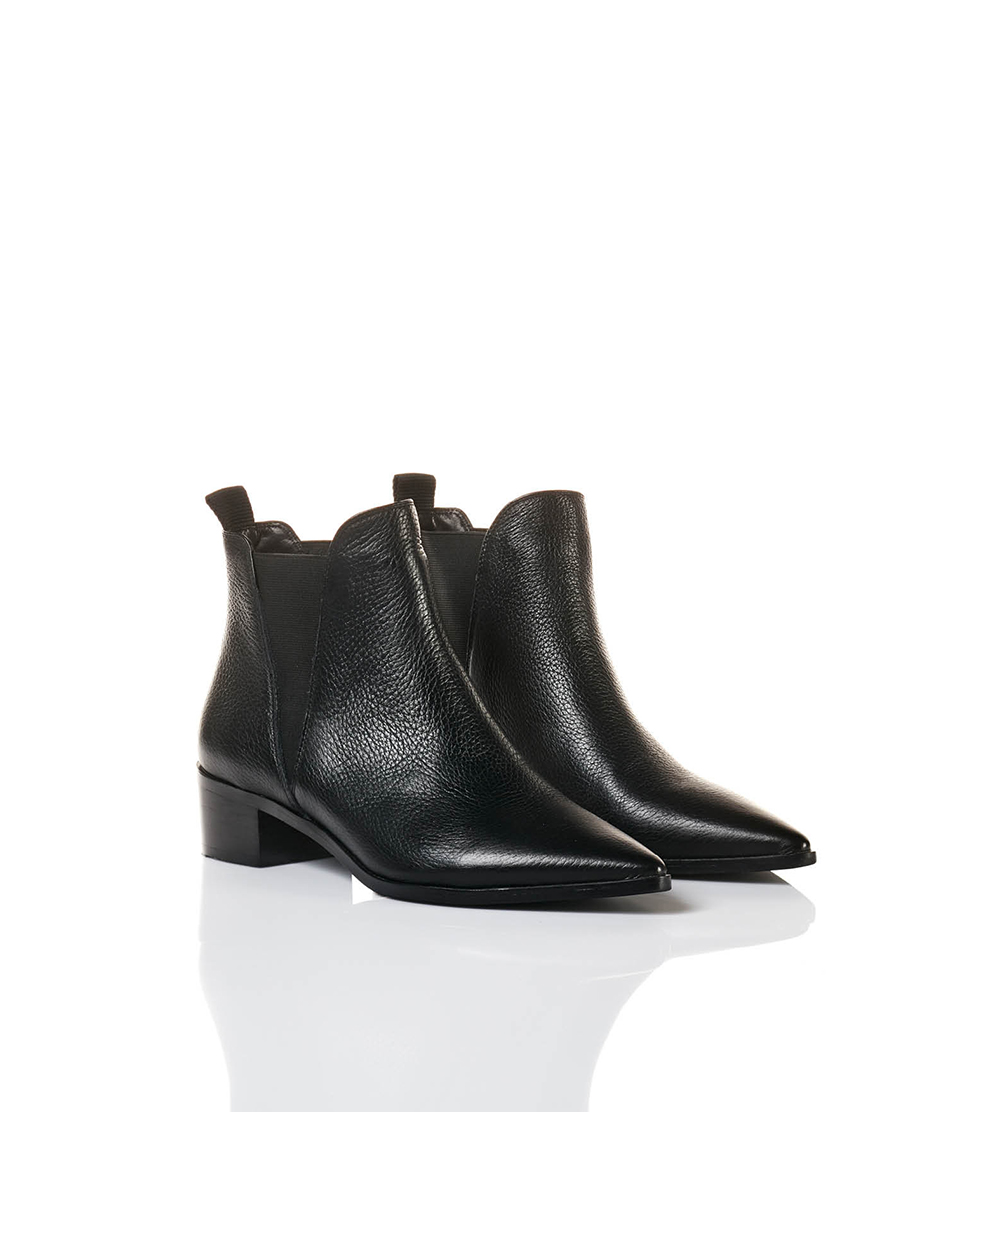 NY Pointed Boot, $359.90, from La Tribe